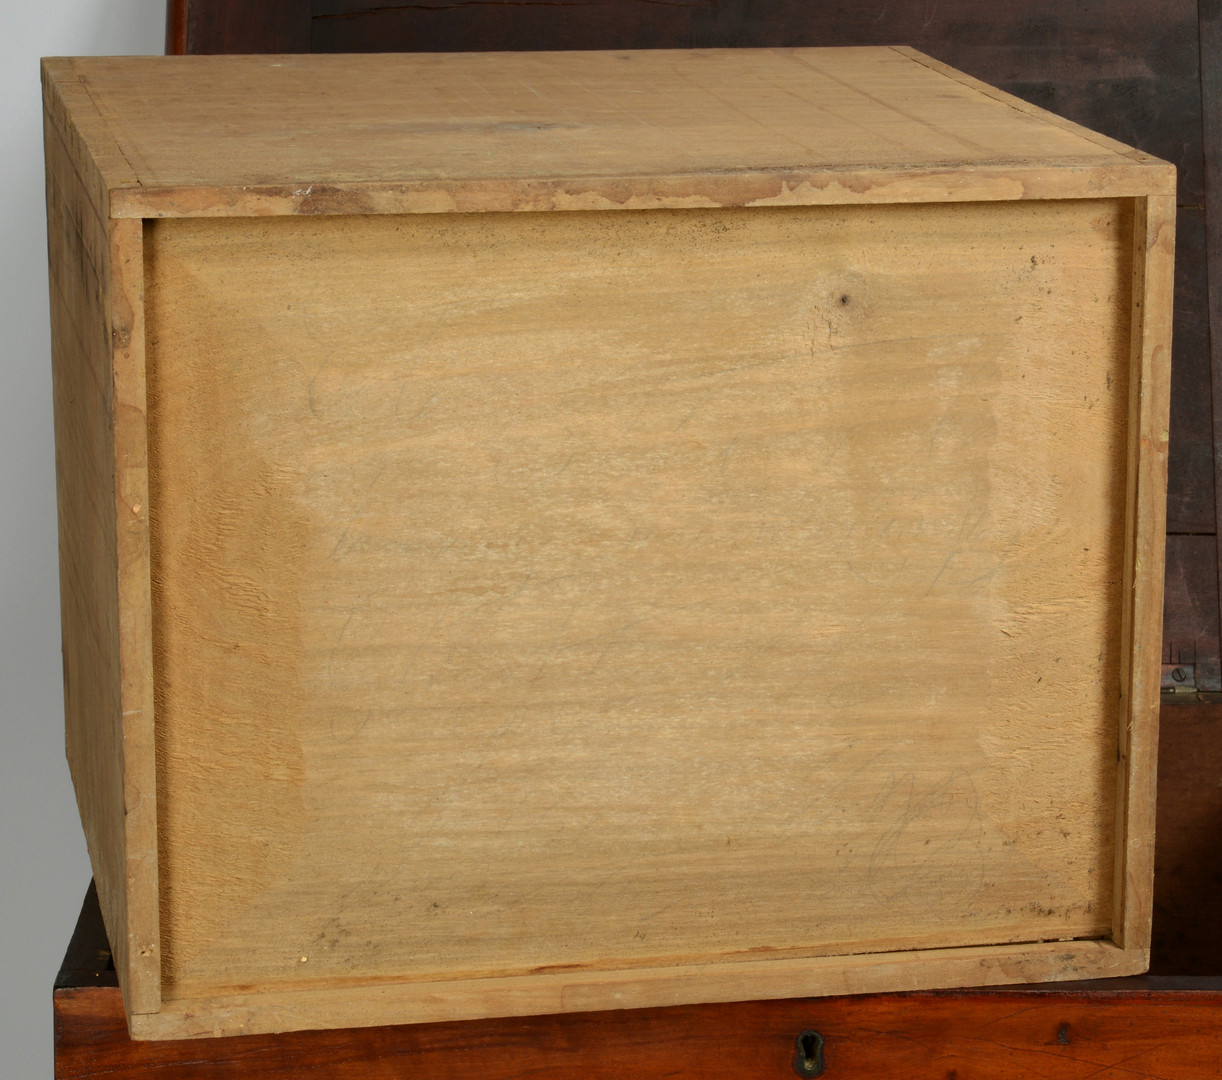 Lot 72: Middle TN Cherry Sugar Chest